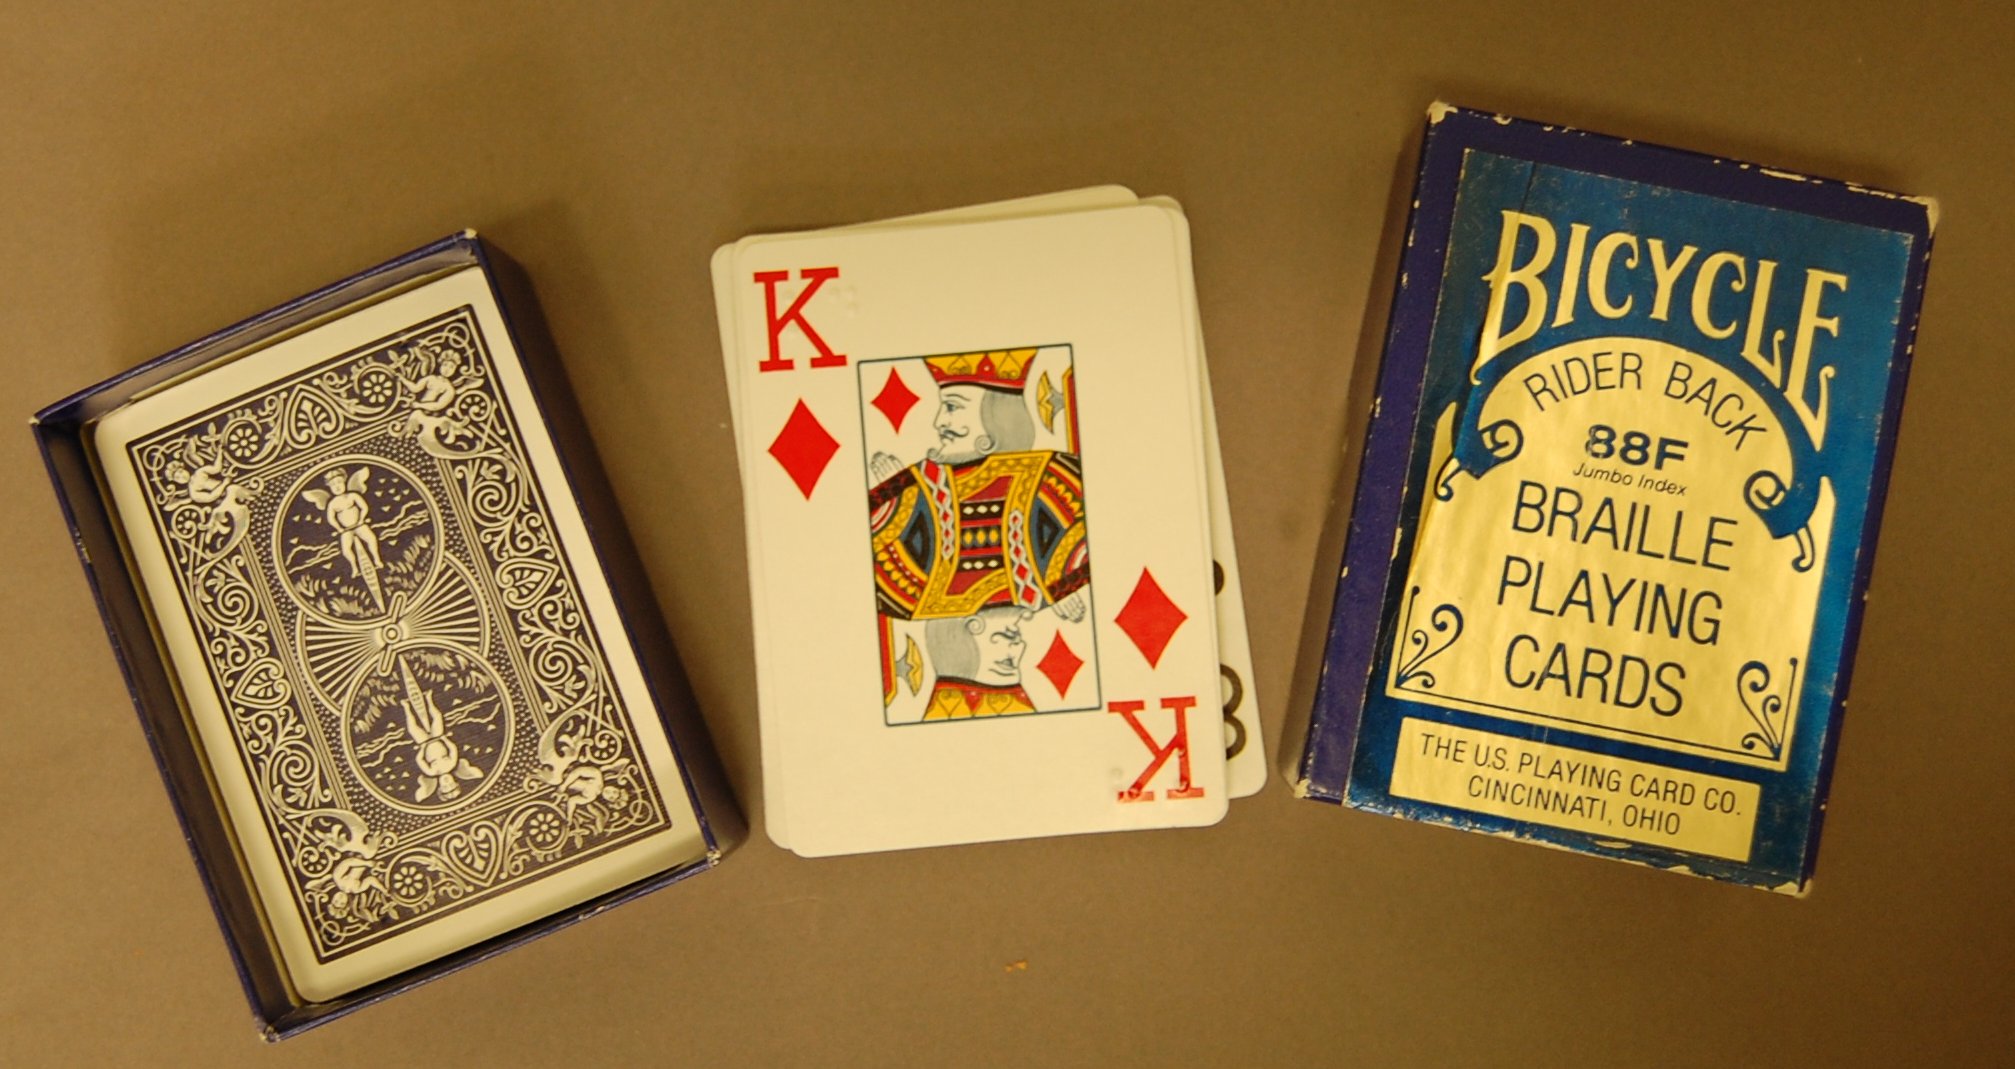 Braille playing cards-1